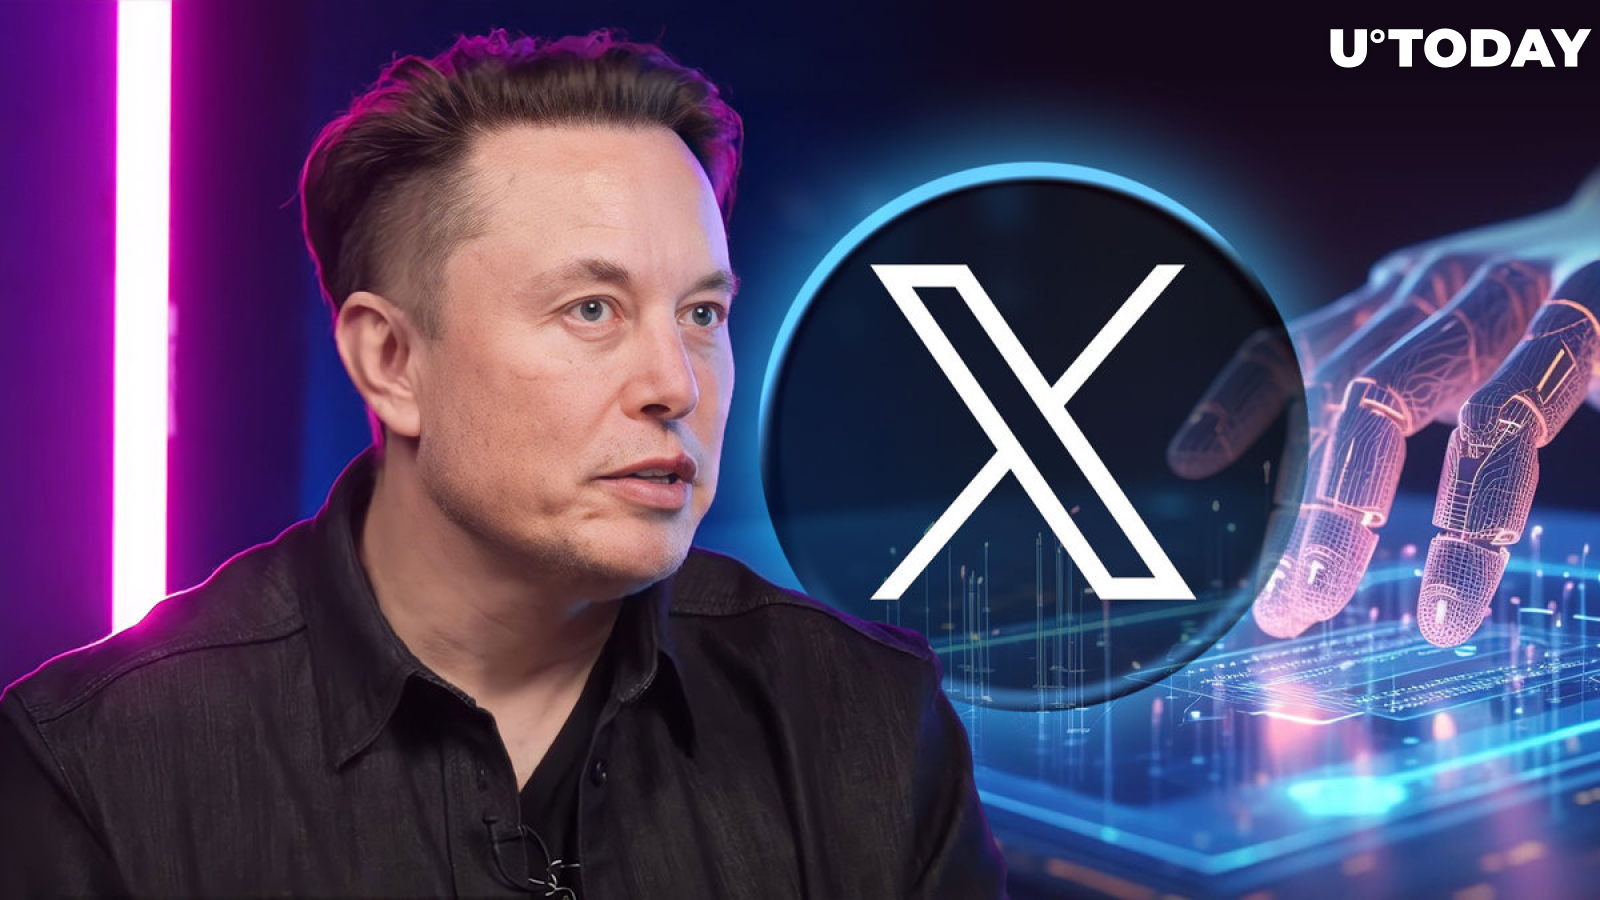 Elon Musk's X Metaverse, If Built, Would Be Game-Changing Move: Dogecoin Founder